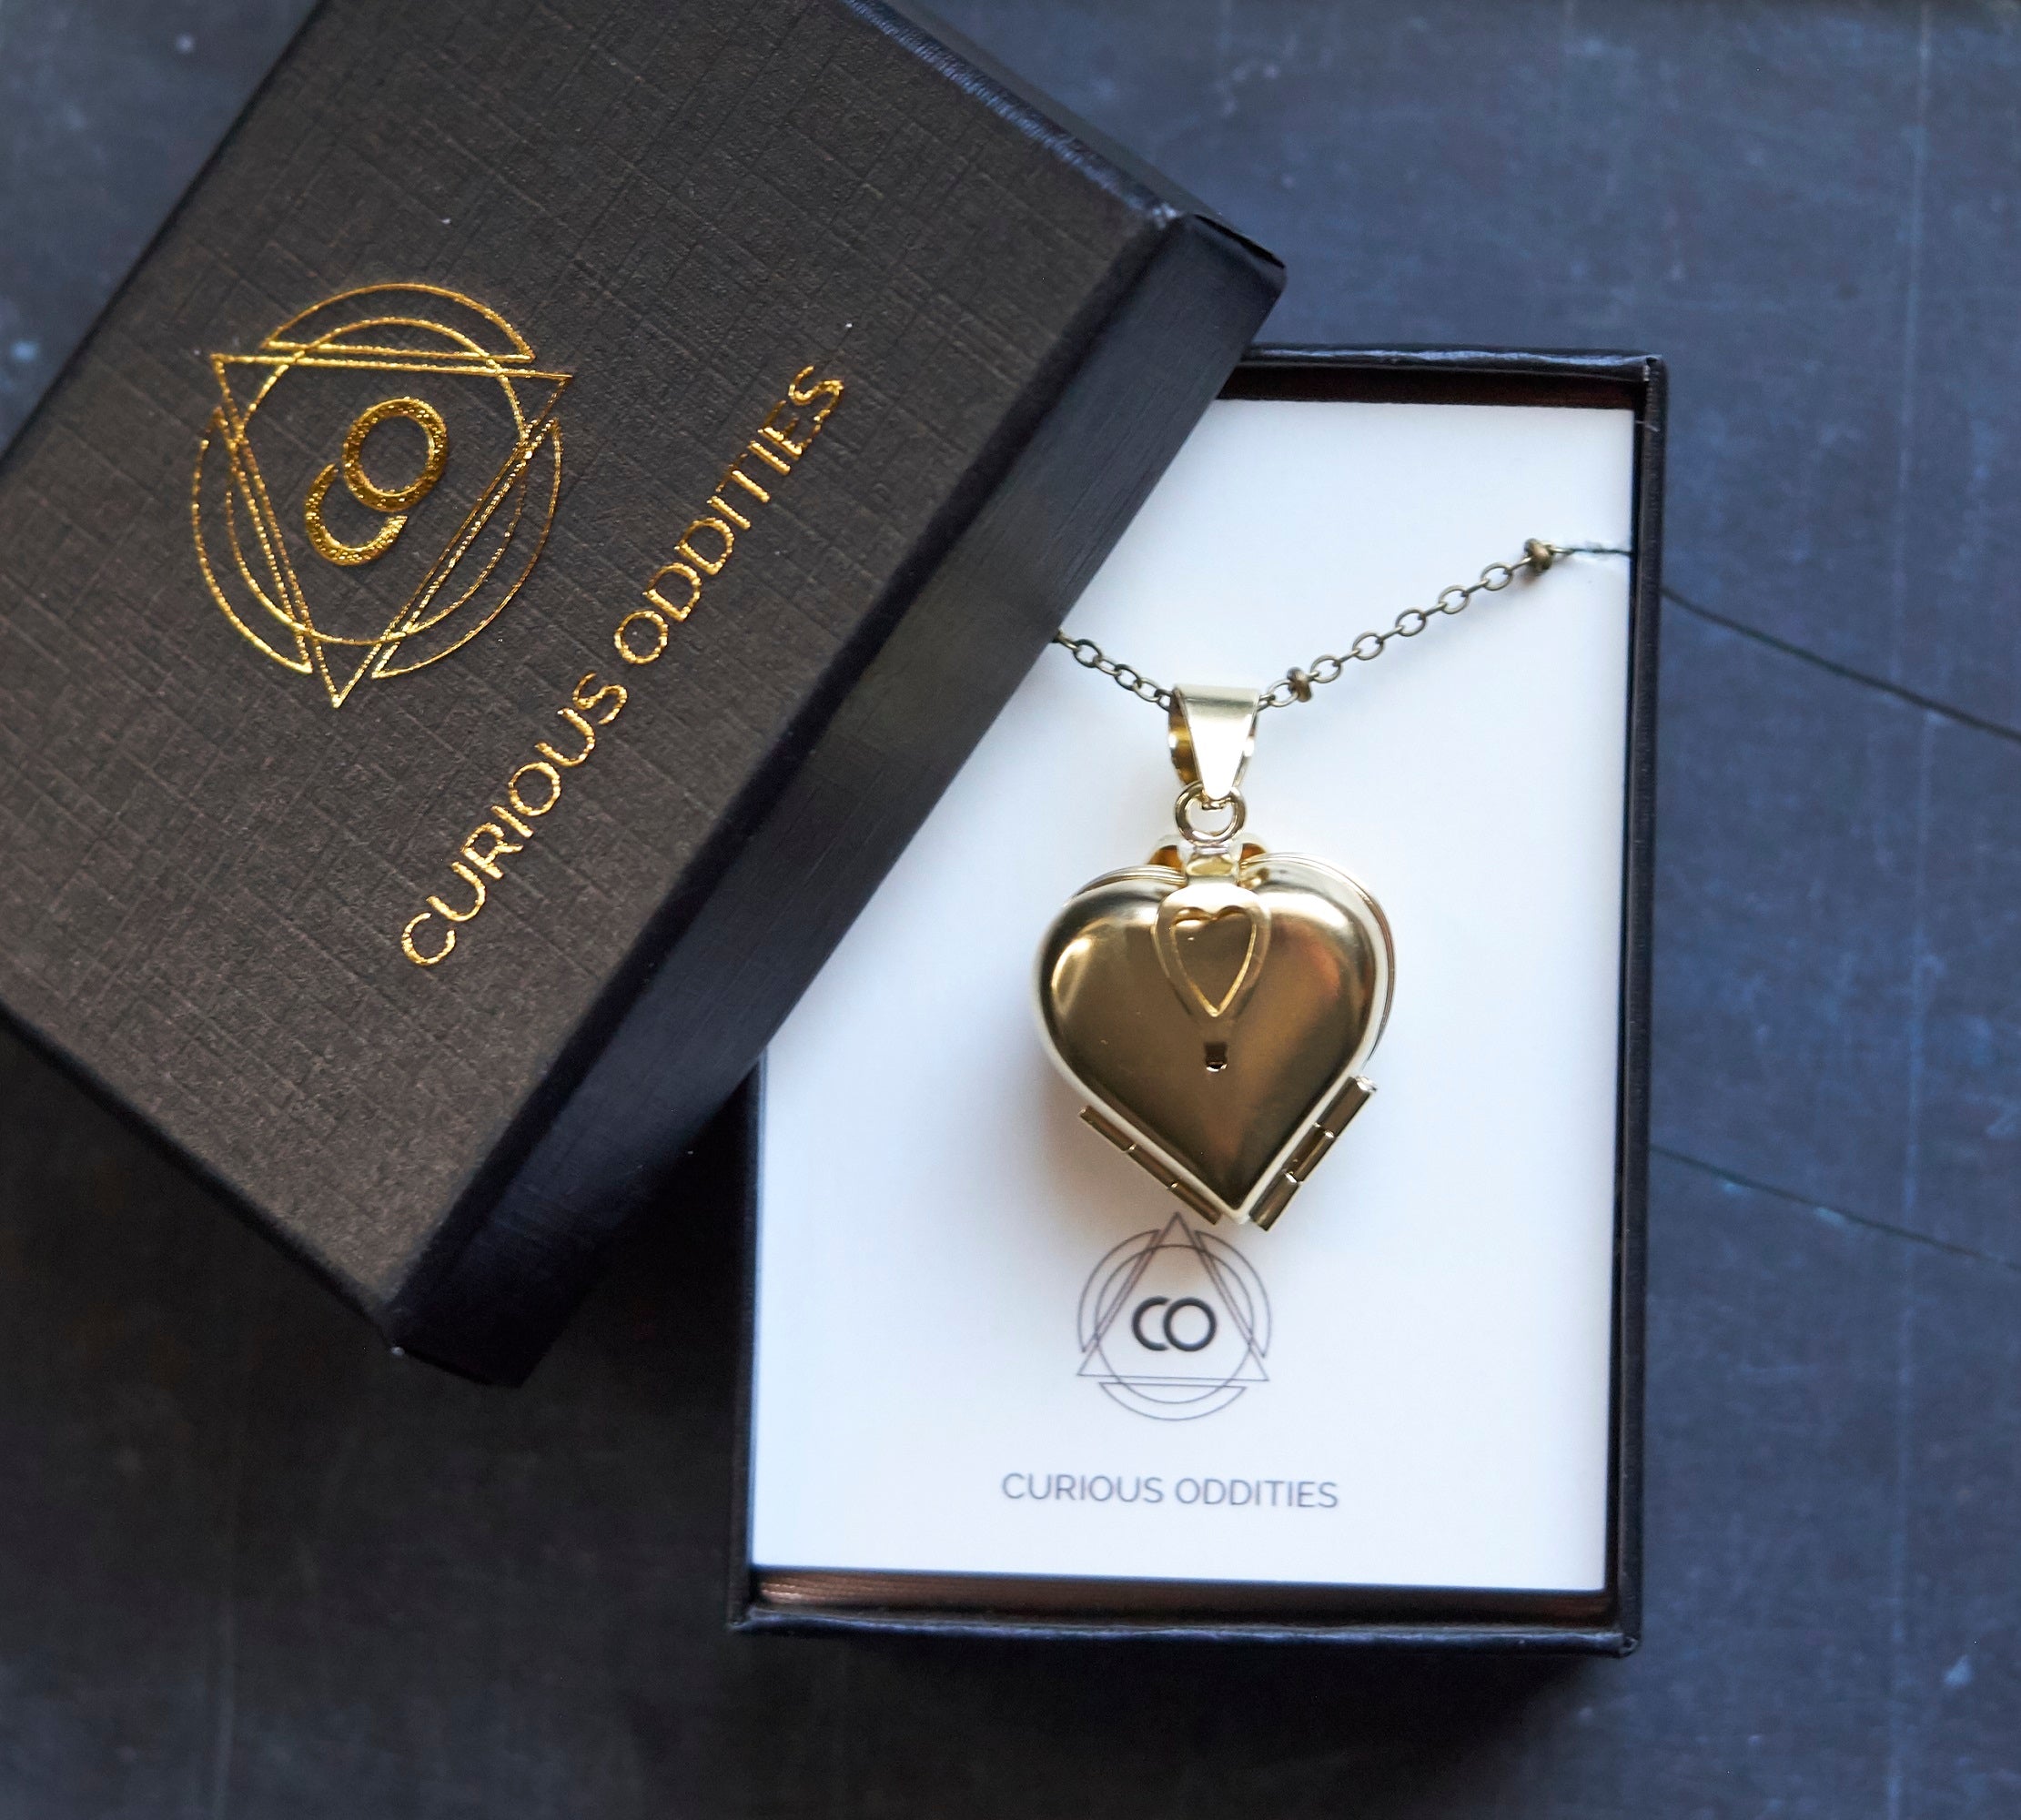 How to Open a Gold Heart Locket Necklace with 4 Photos - YouTube